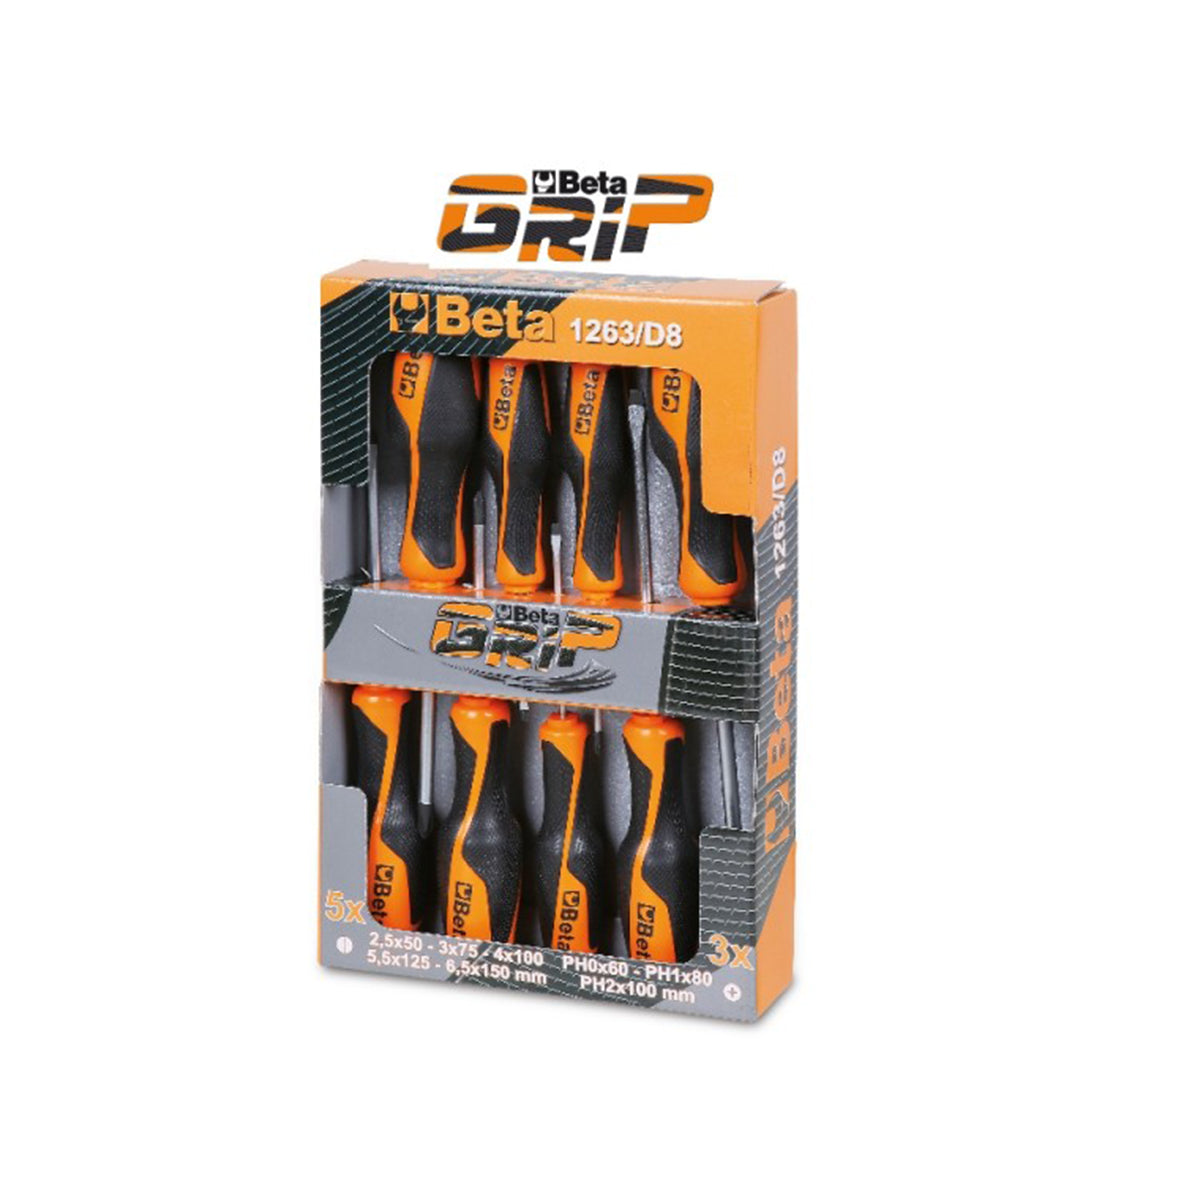 Set of 8 screwdrivers, 5 with flat blades and 3 Phillips head - Beta